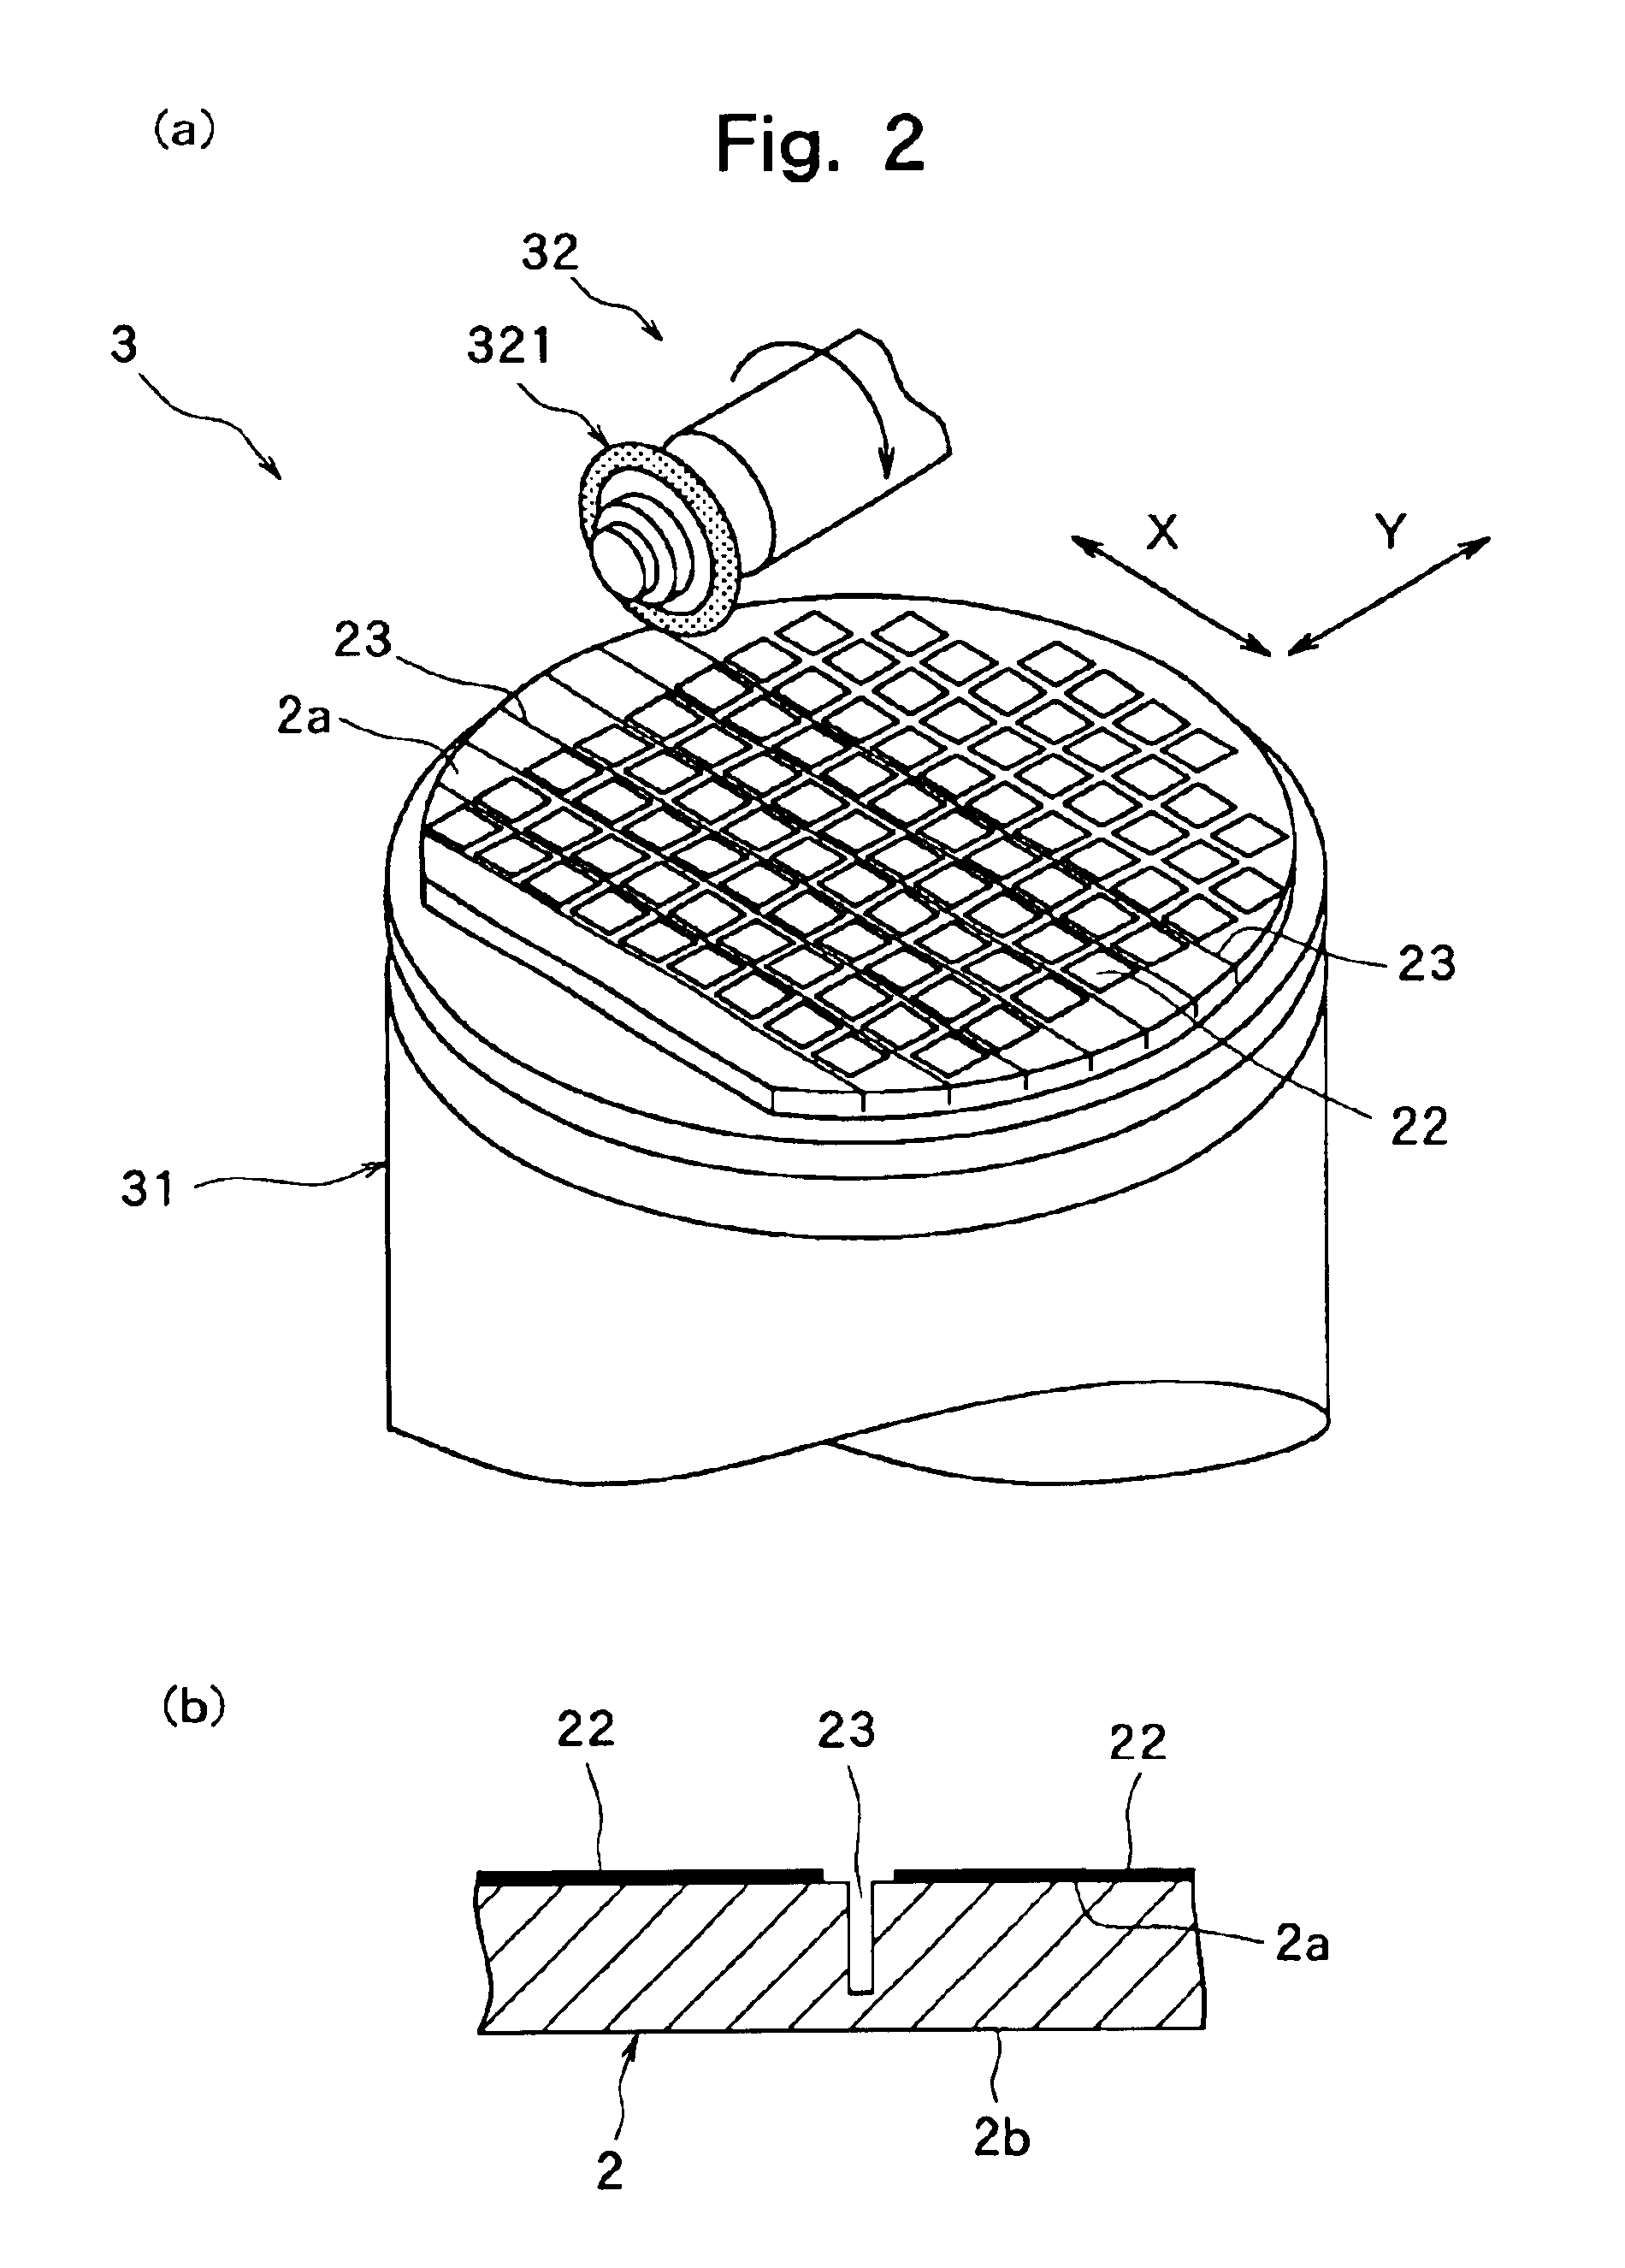 Process for manufacturing a semiconductor chip